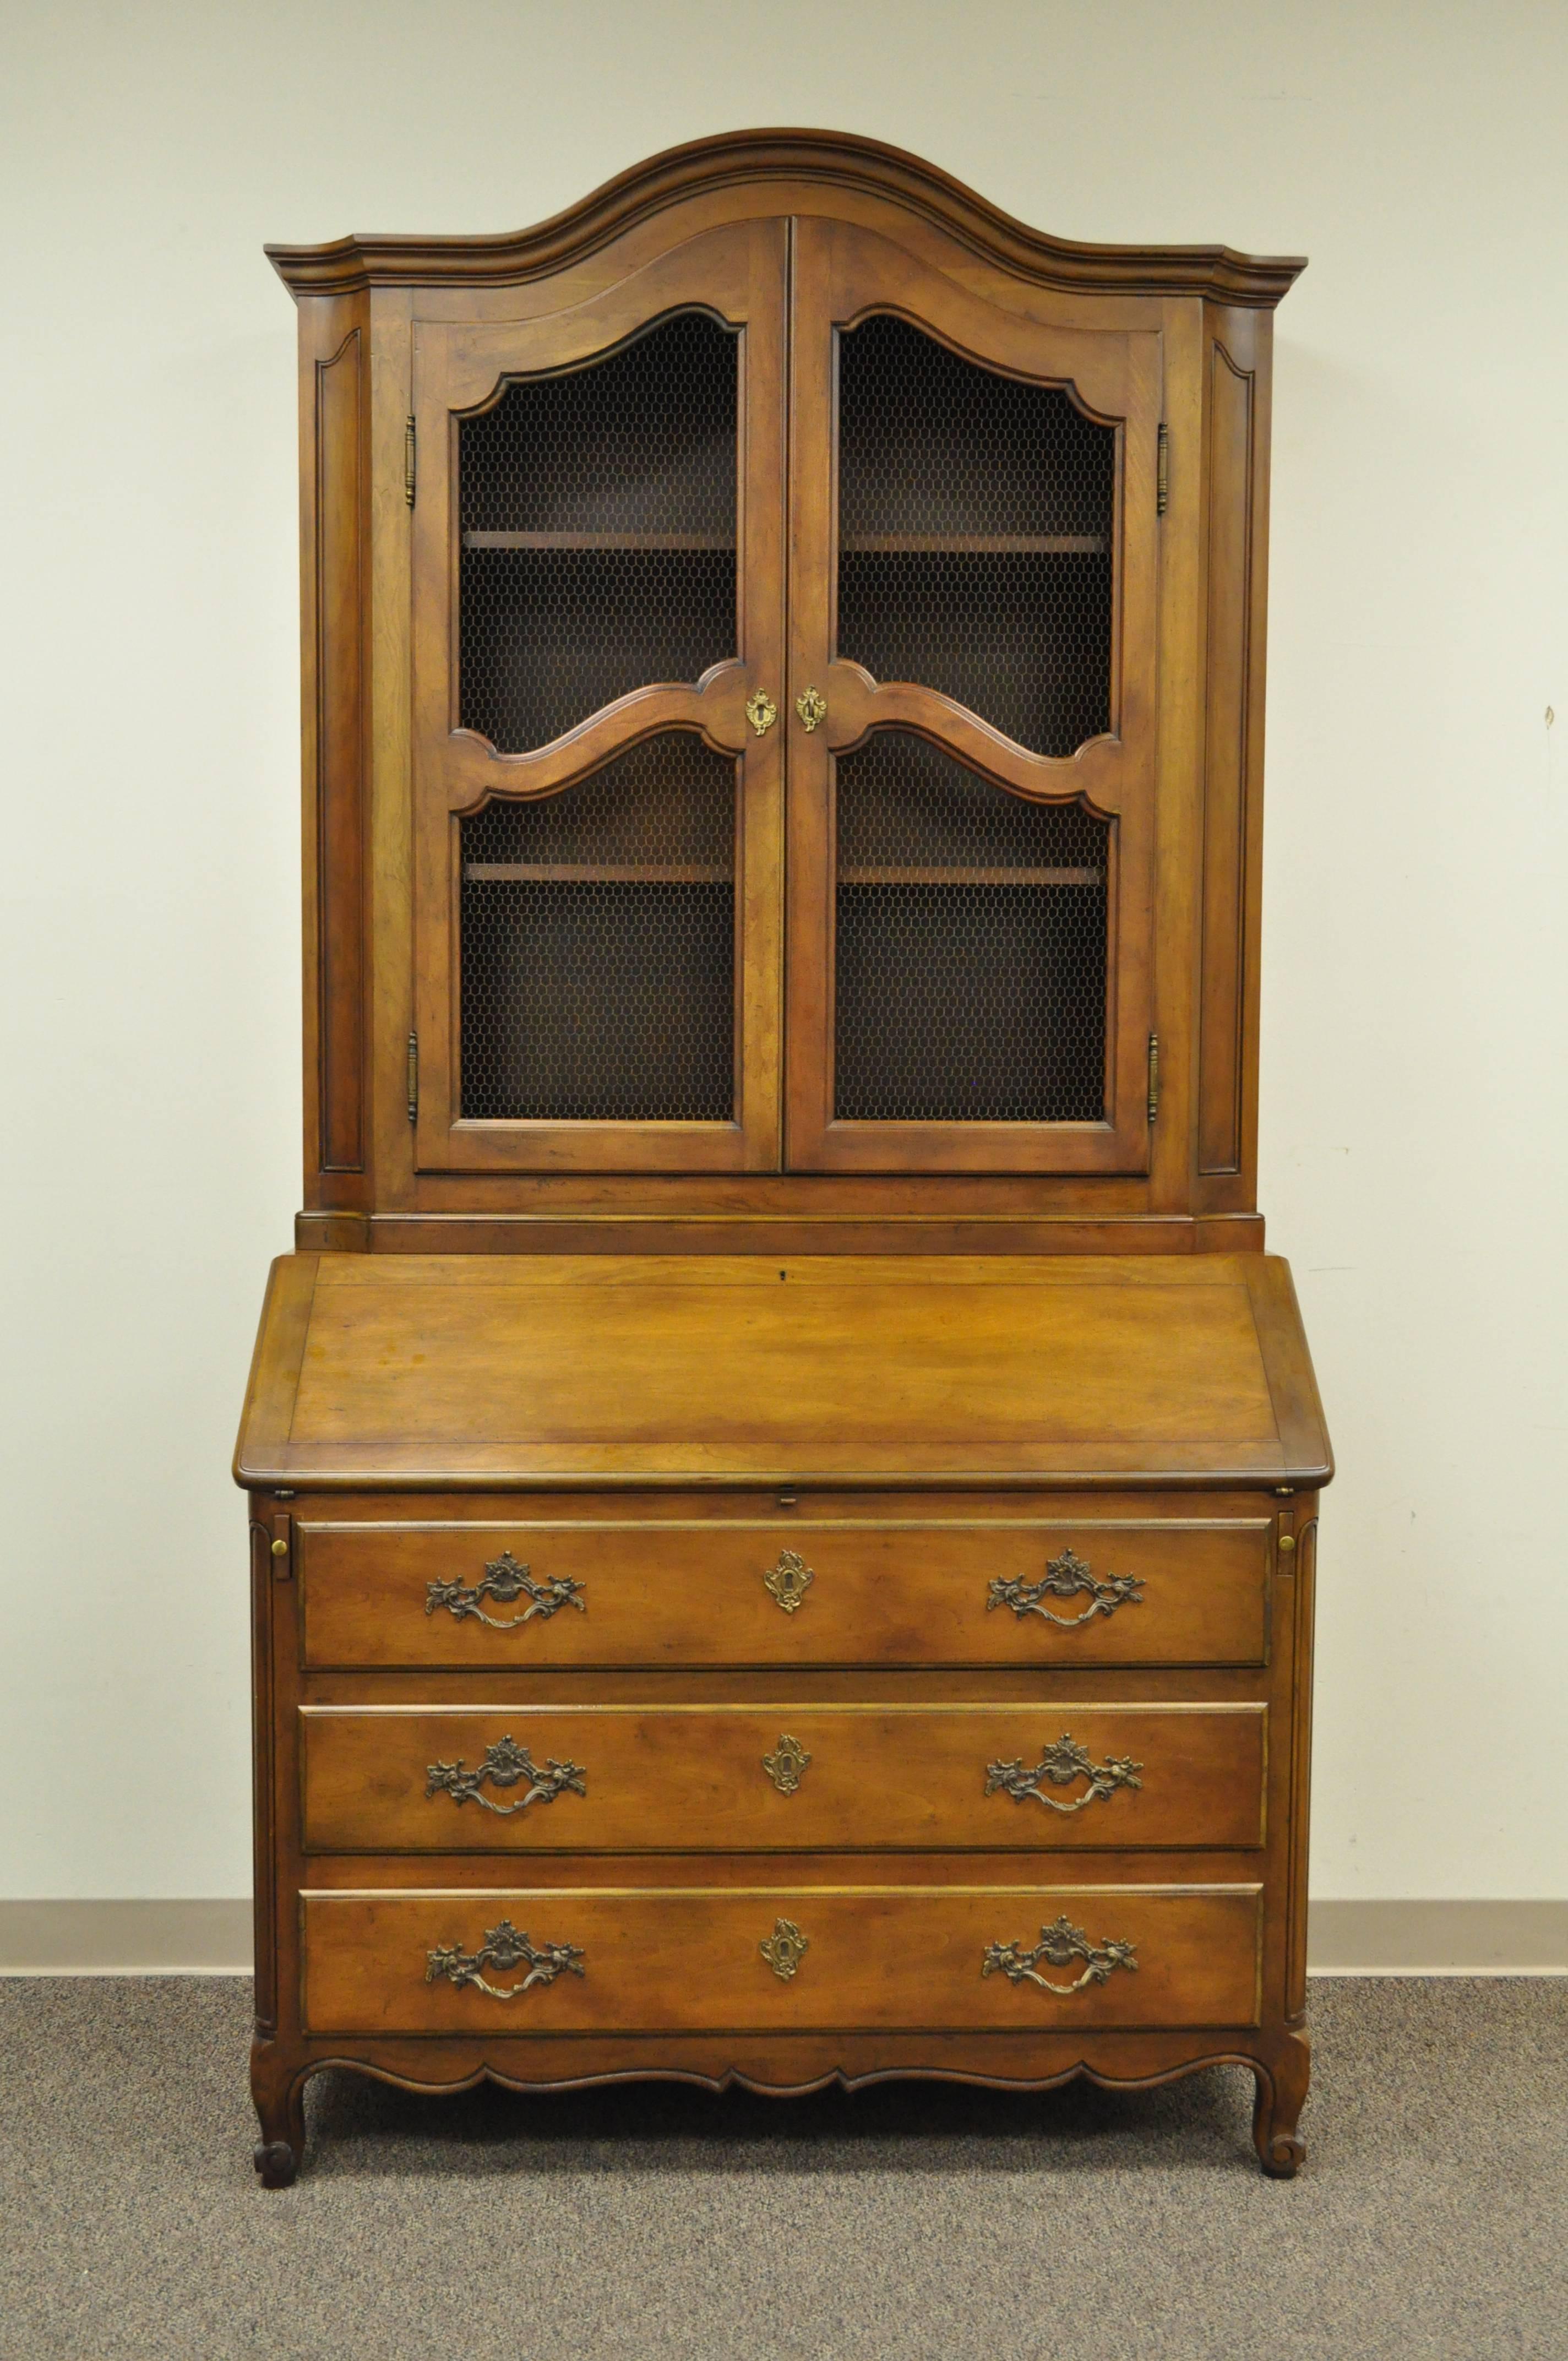 Remarkable quality two-piece walnut secretary desk by Baker Furniture Co. in the Country French Taste. Item features a bonnet top bookcase upper with adjustable interior shelving, metal lattice door fronts, drop front writing desk with leather top